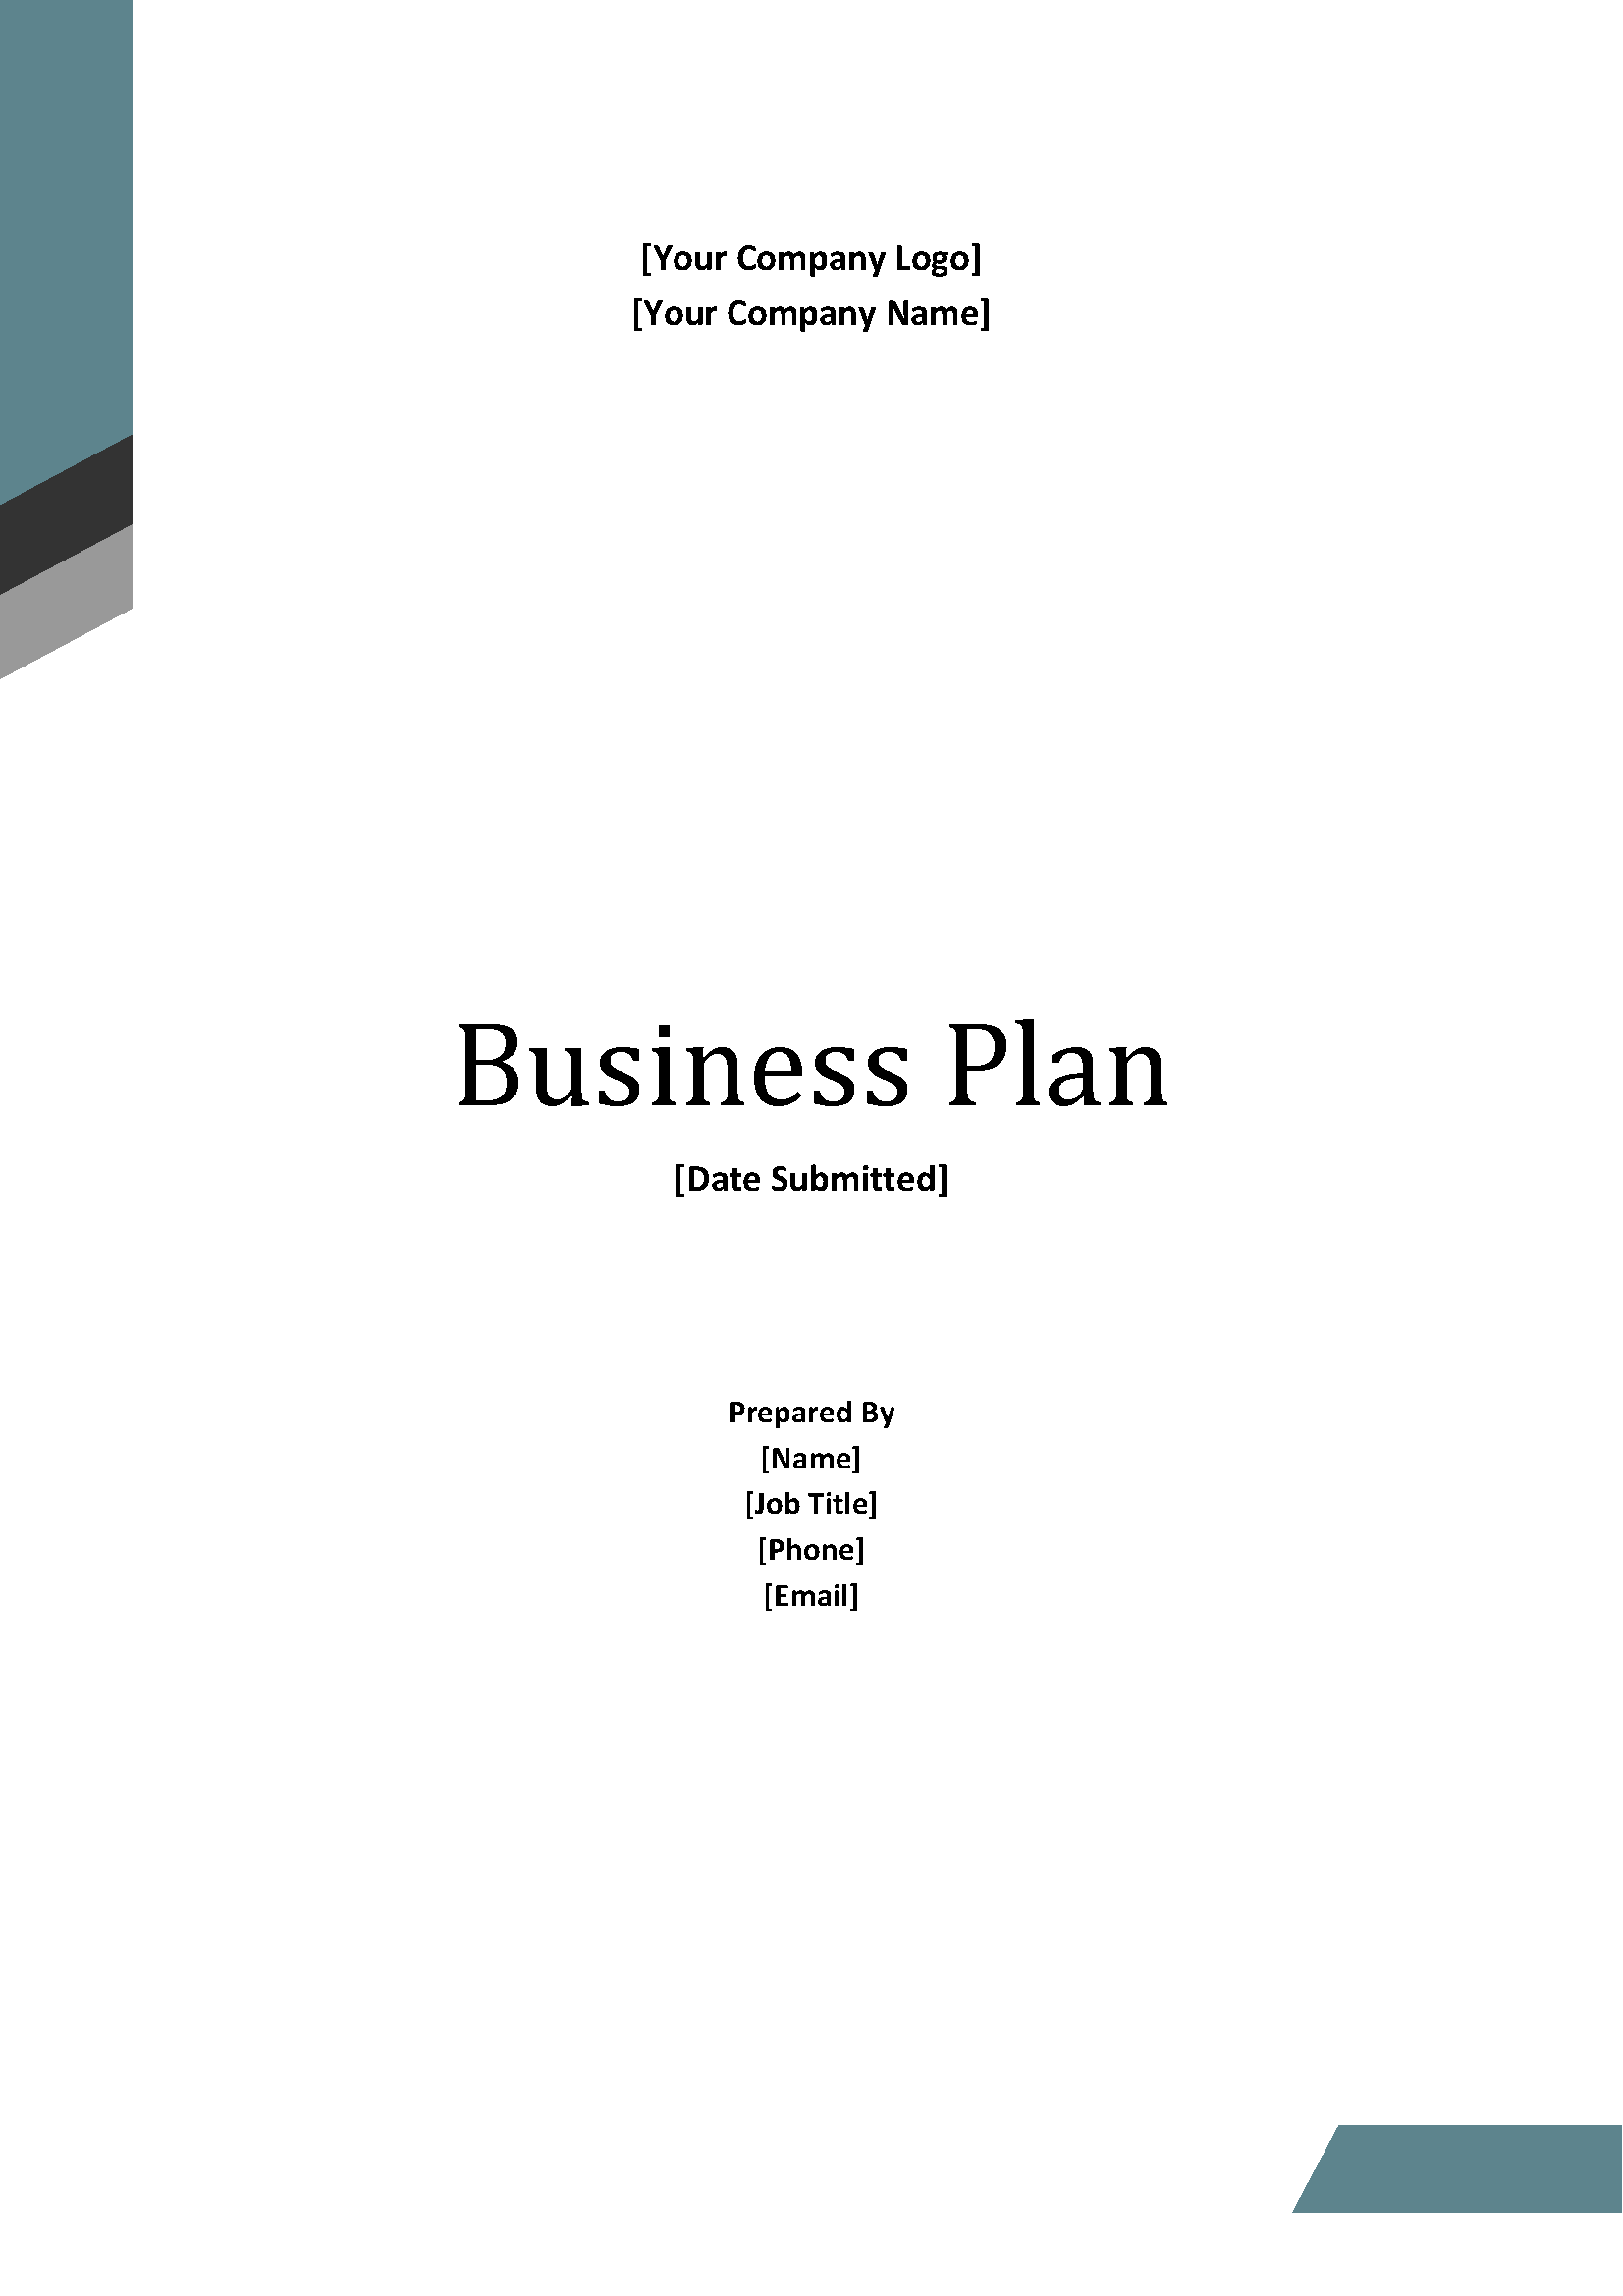 26 - Software Company Business Plan Template